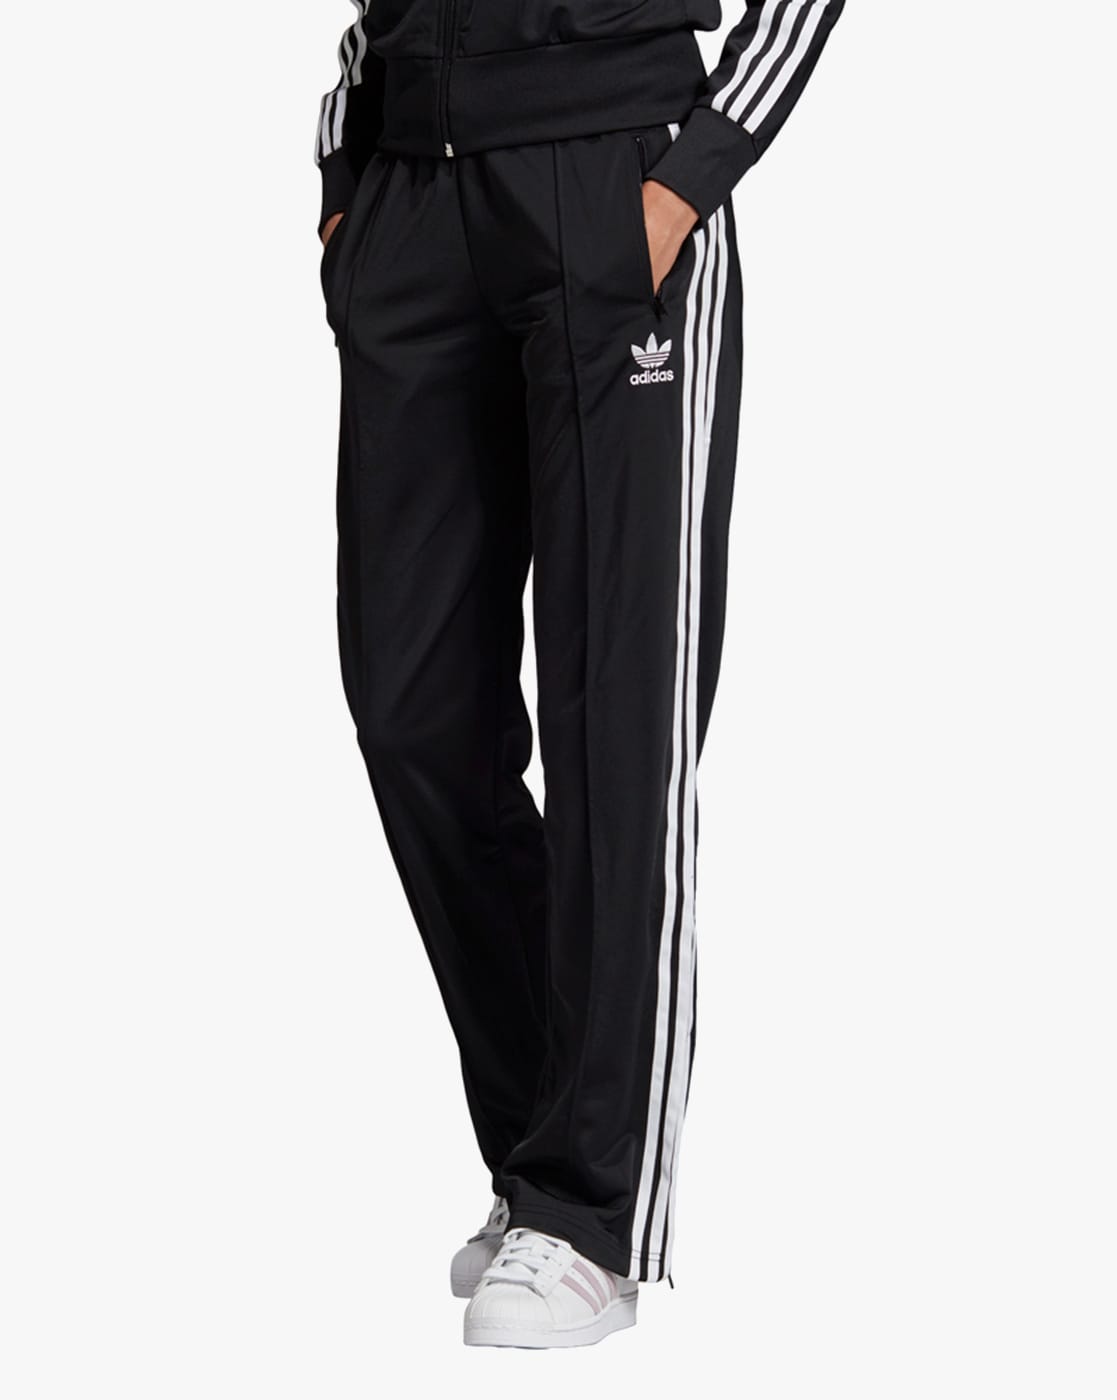 Solid Regular Fit Polyester Womens Track Pants